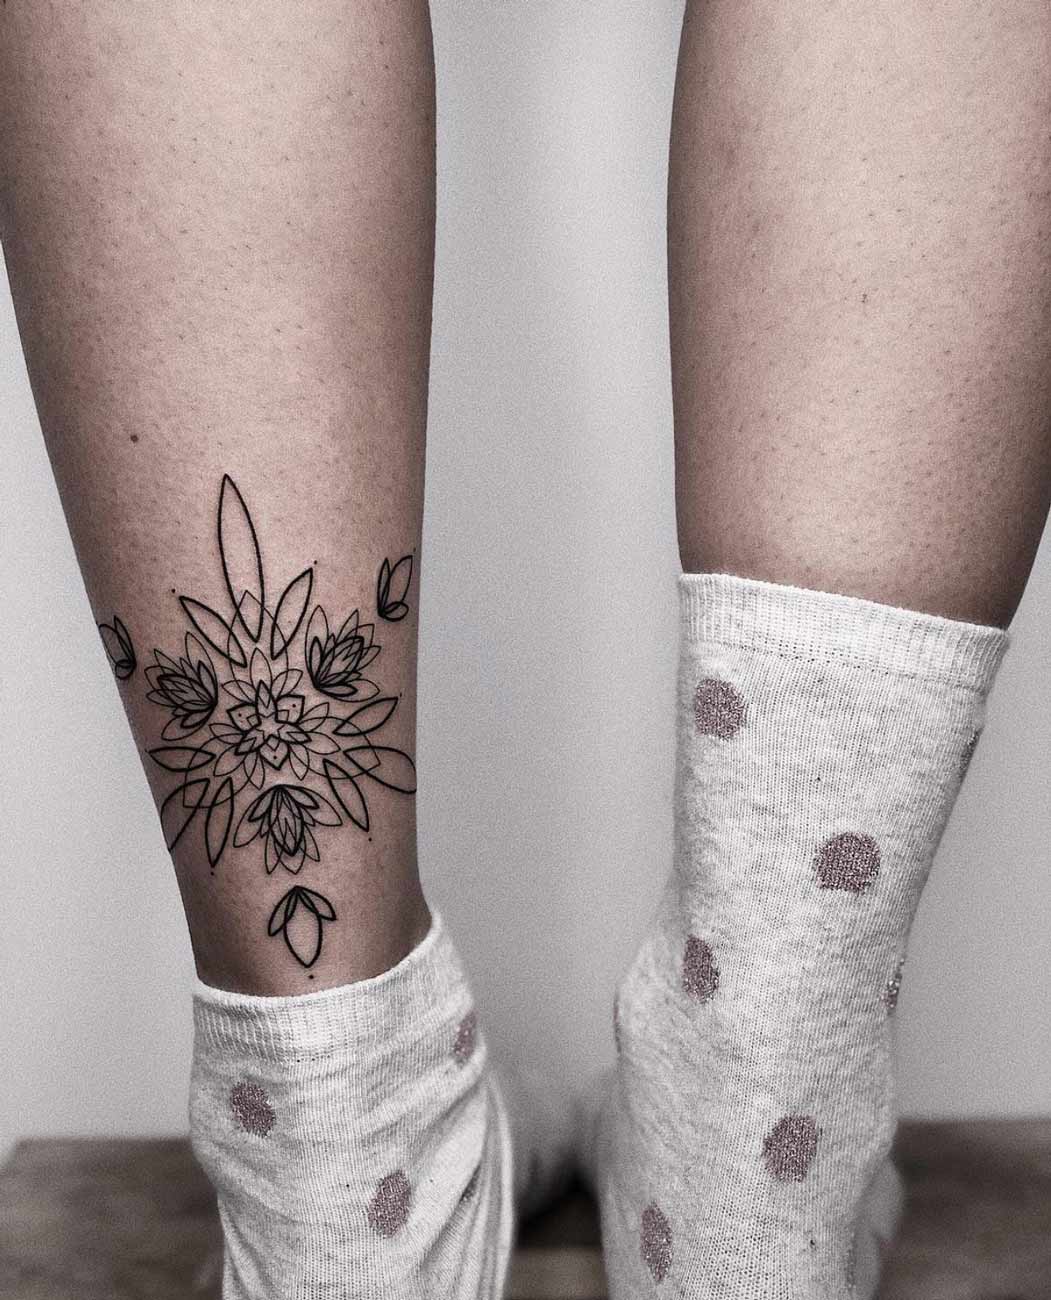 A cool ankle tat by Victoria